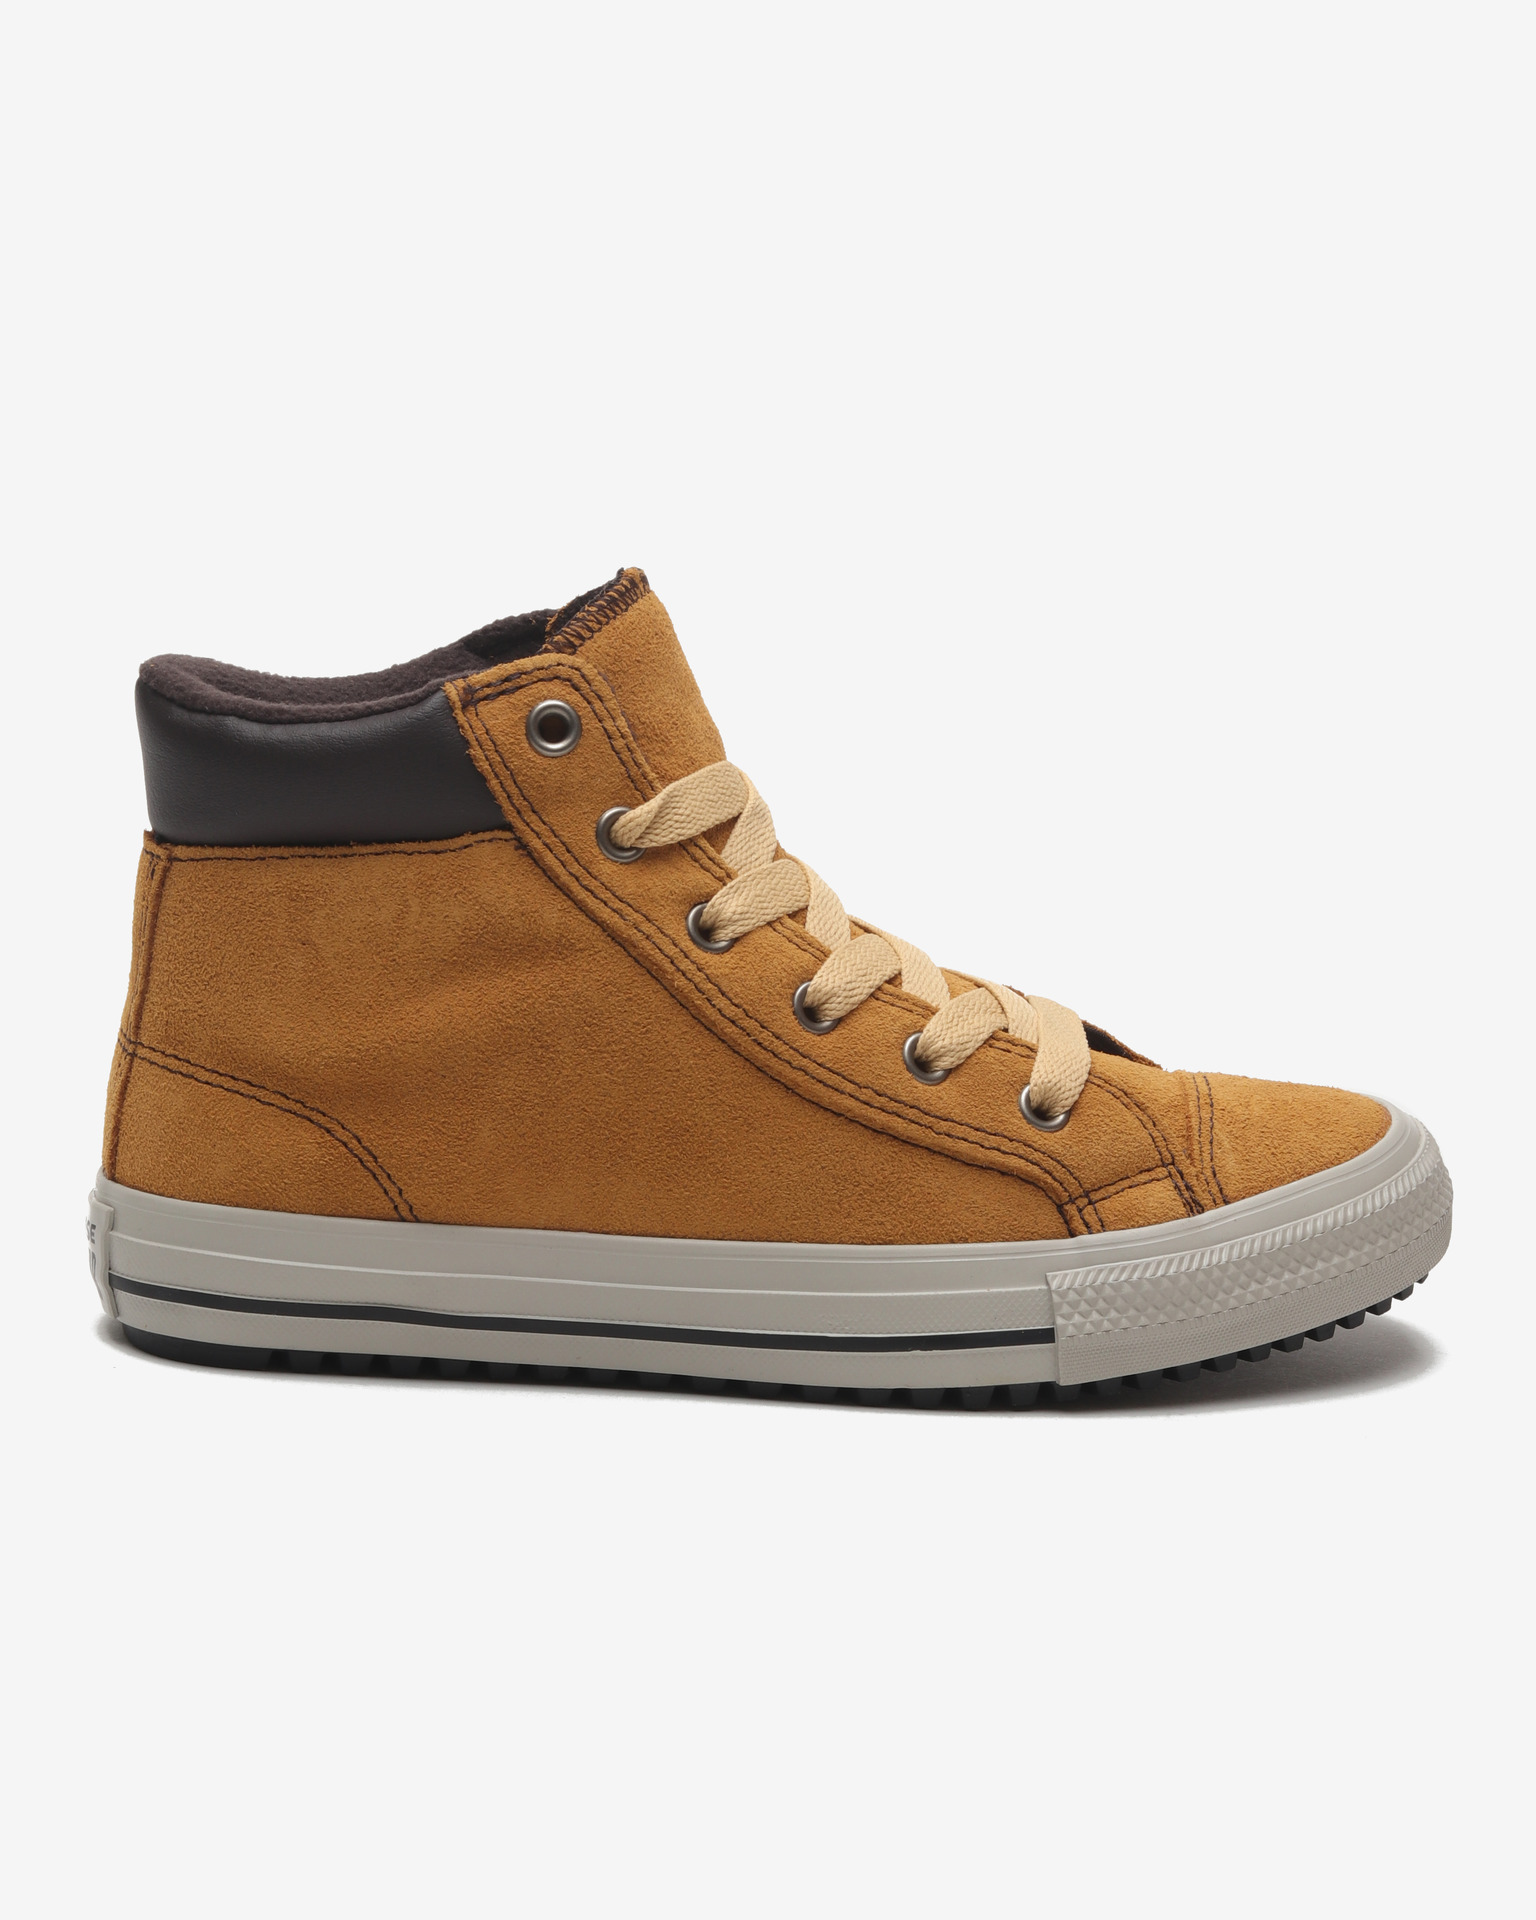 converse all star ankle boot